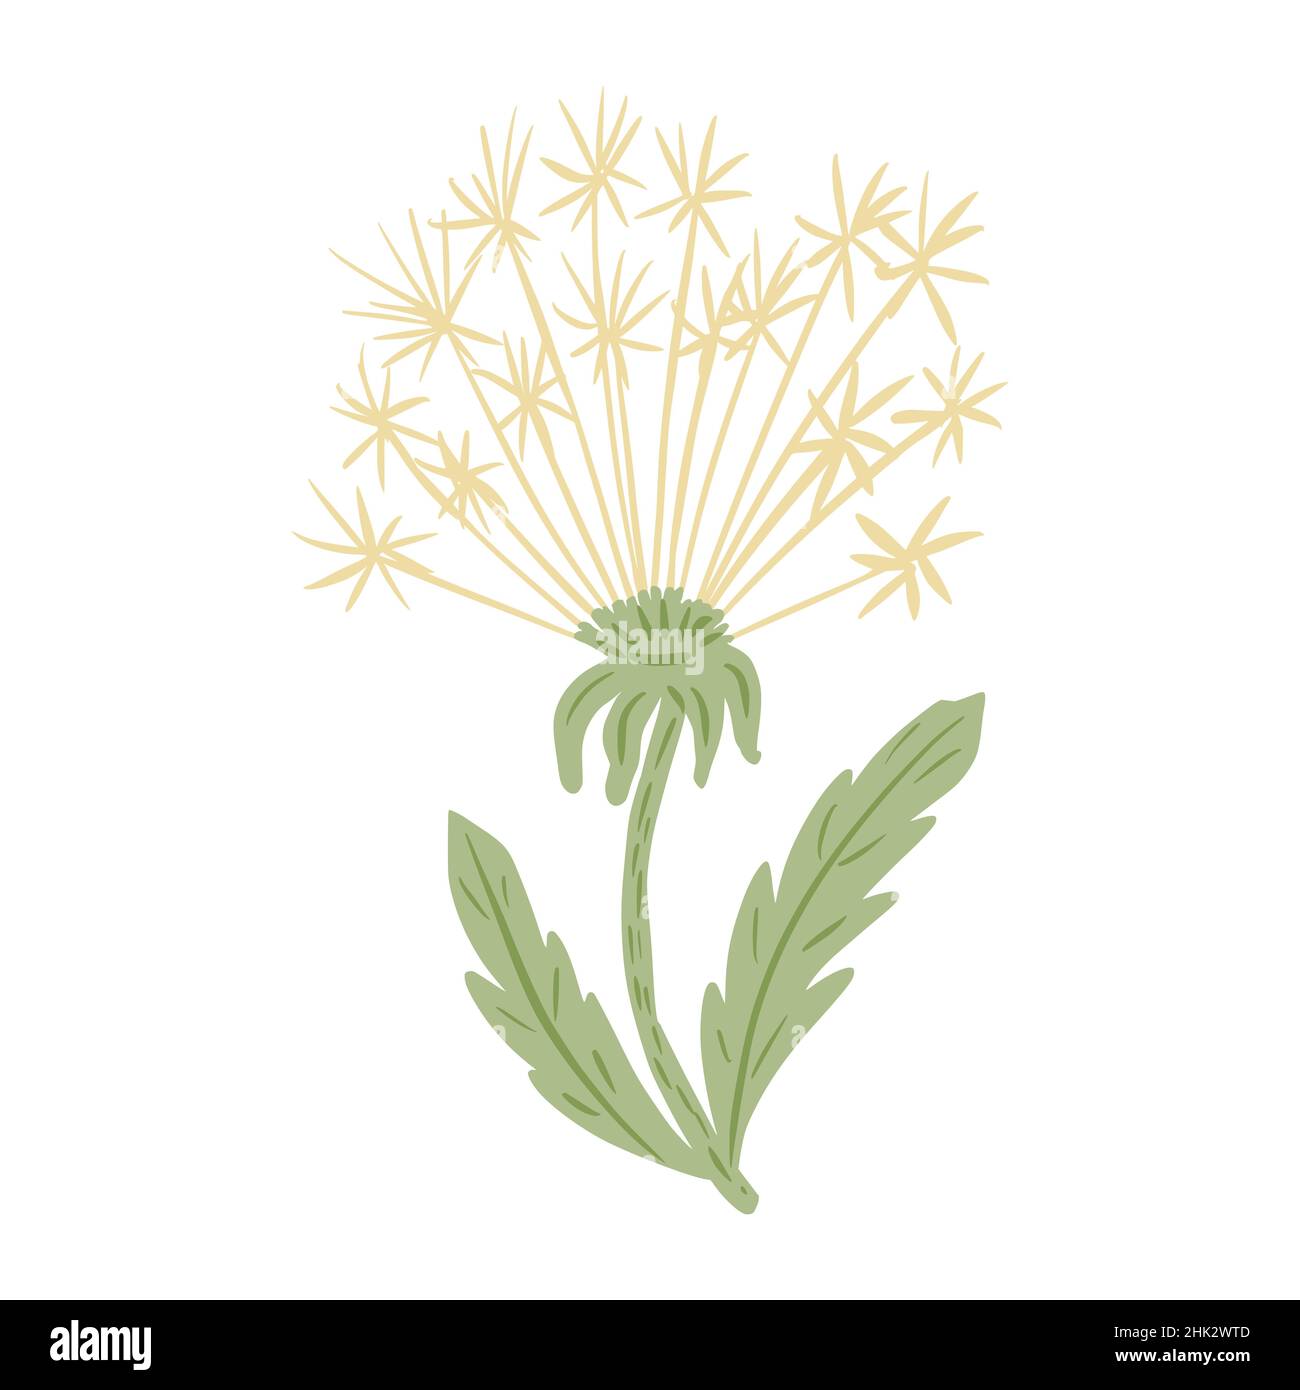 White flower dandelion isolated on white background. Beautiful hand drawn botanical sketches for any purpose. Design vector illustration. Stock Vector